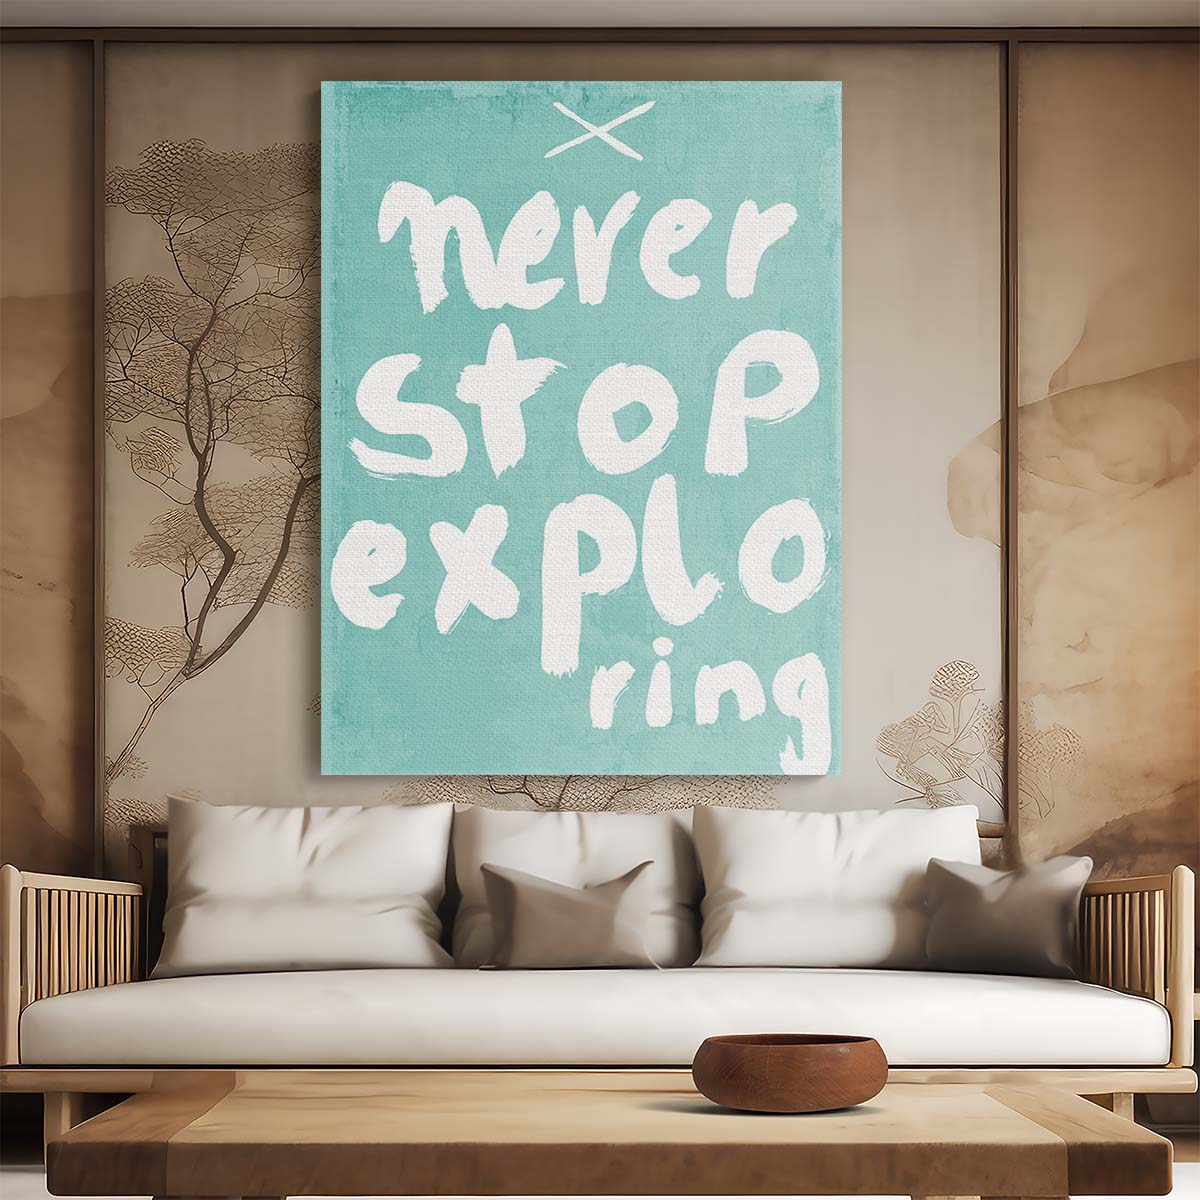 Motivational Turquoise Explorer Quote Illustration for Kids Room by Luxuriance Designs, made in USA